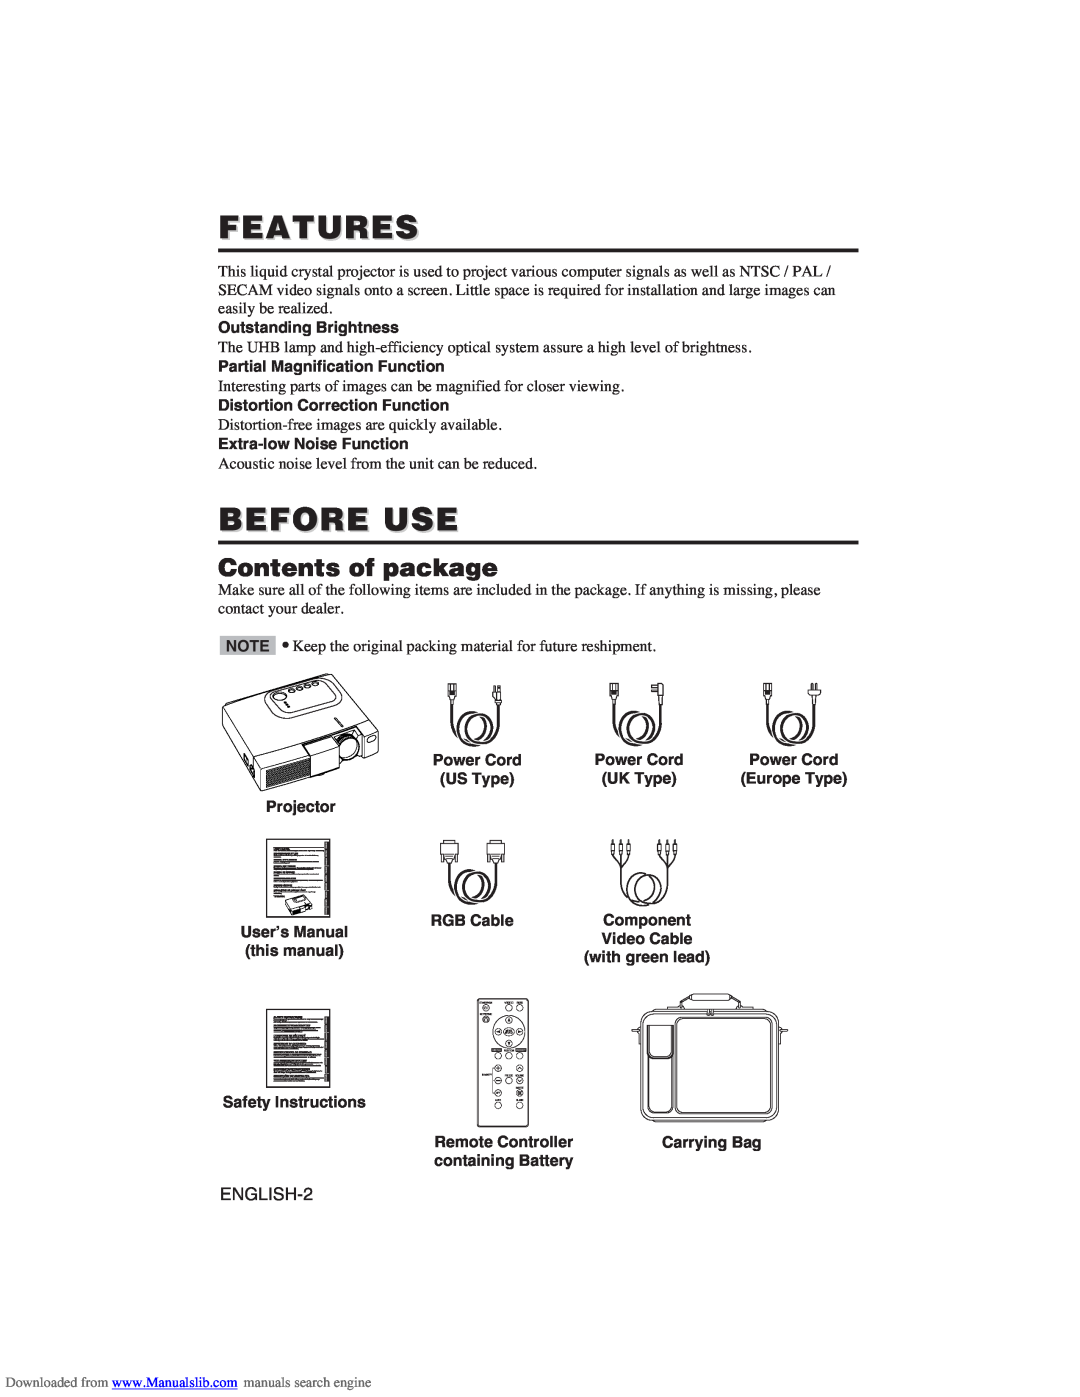 Hitachi CP-X275W user manual Features, Before Use, Contents of package 